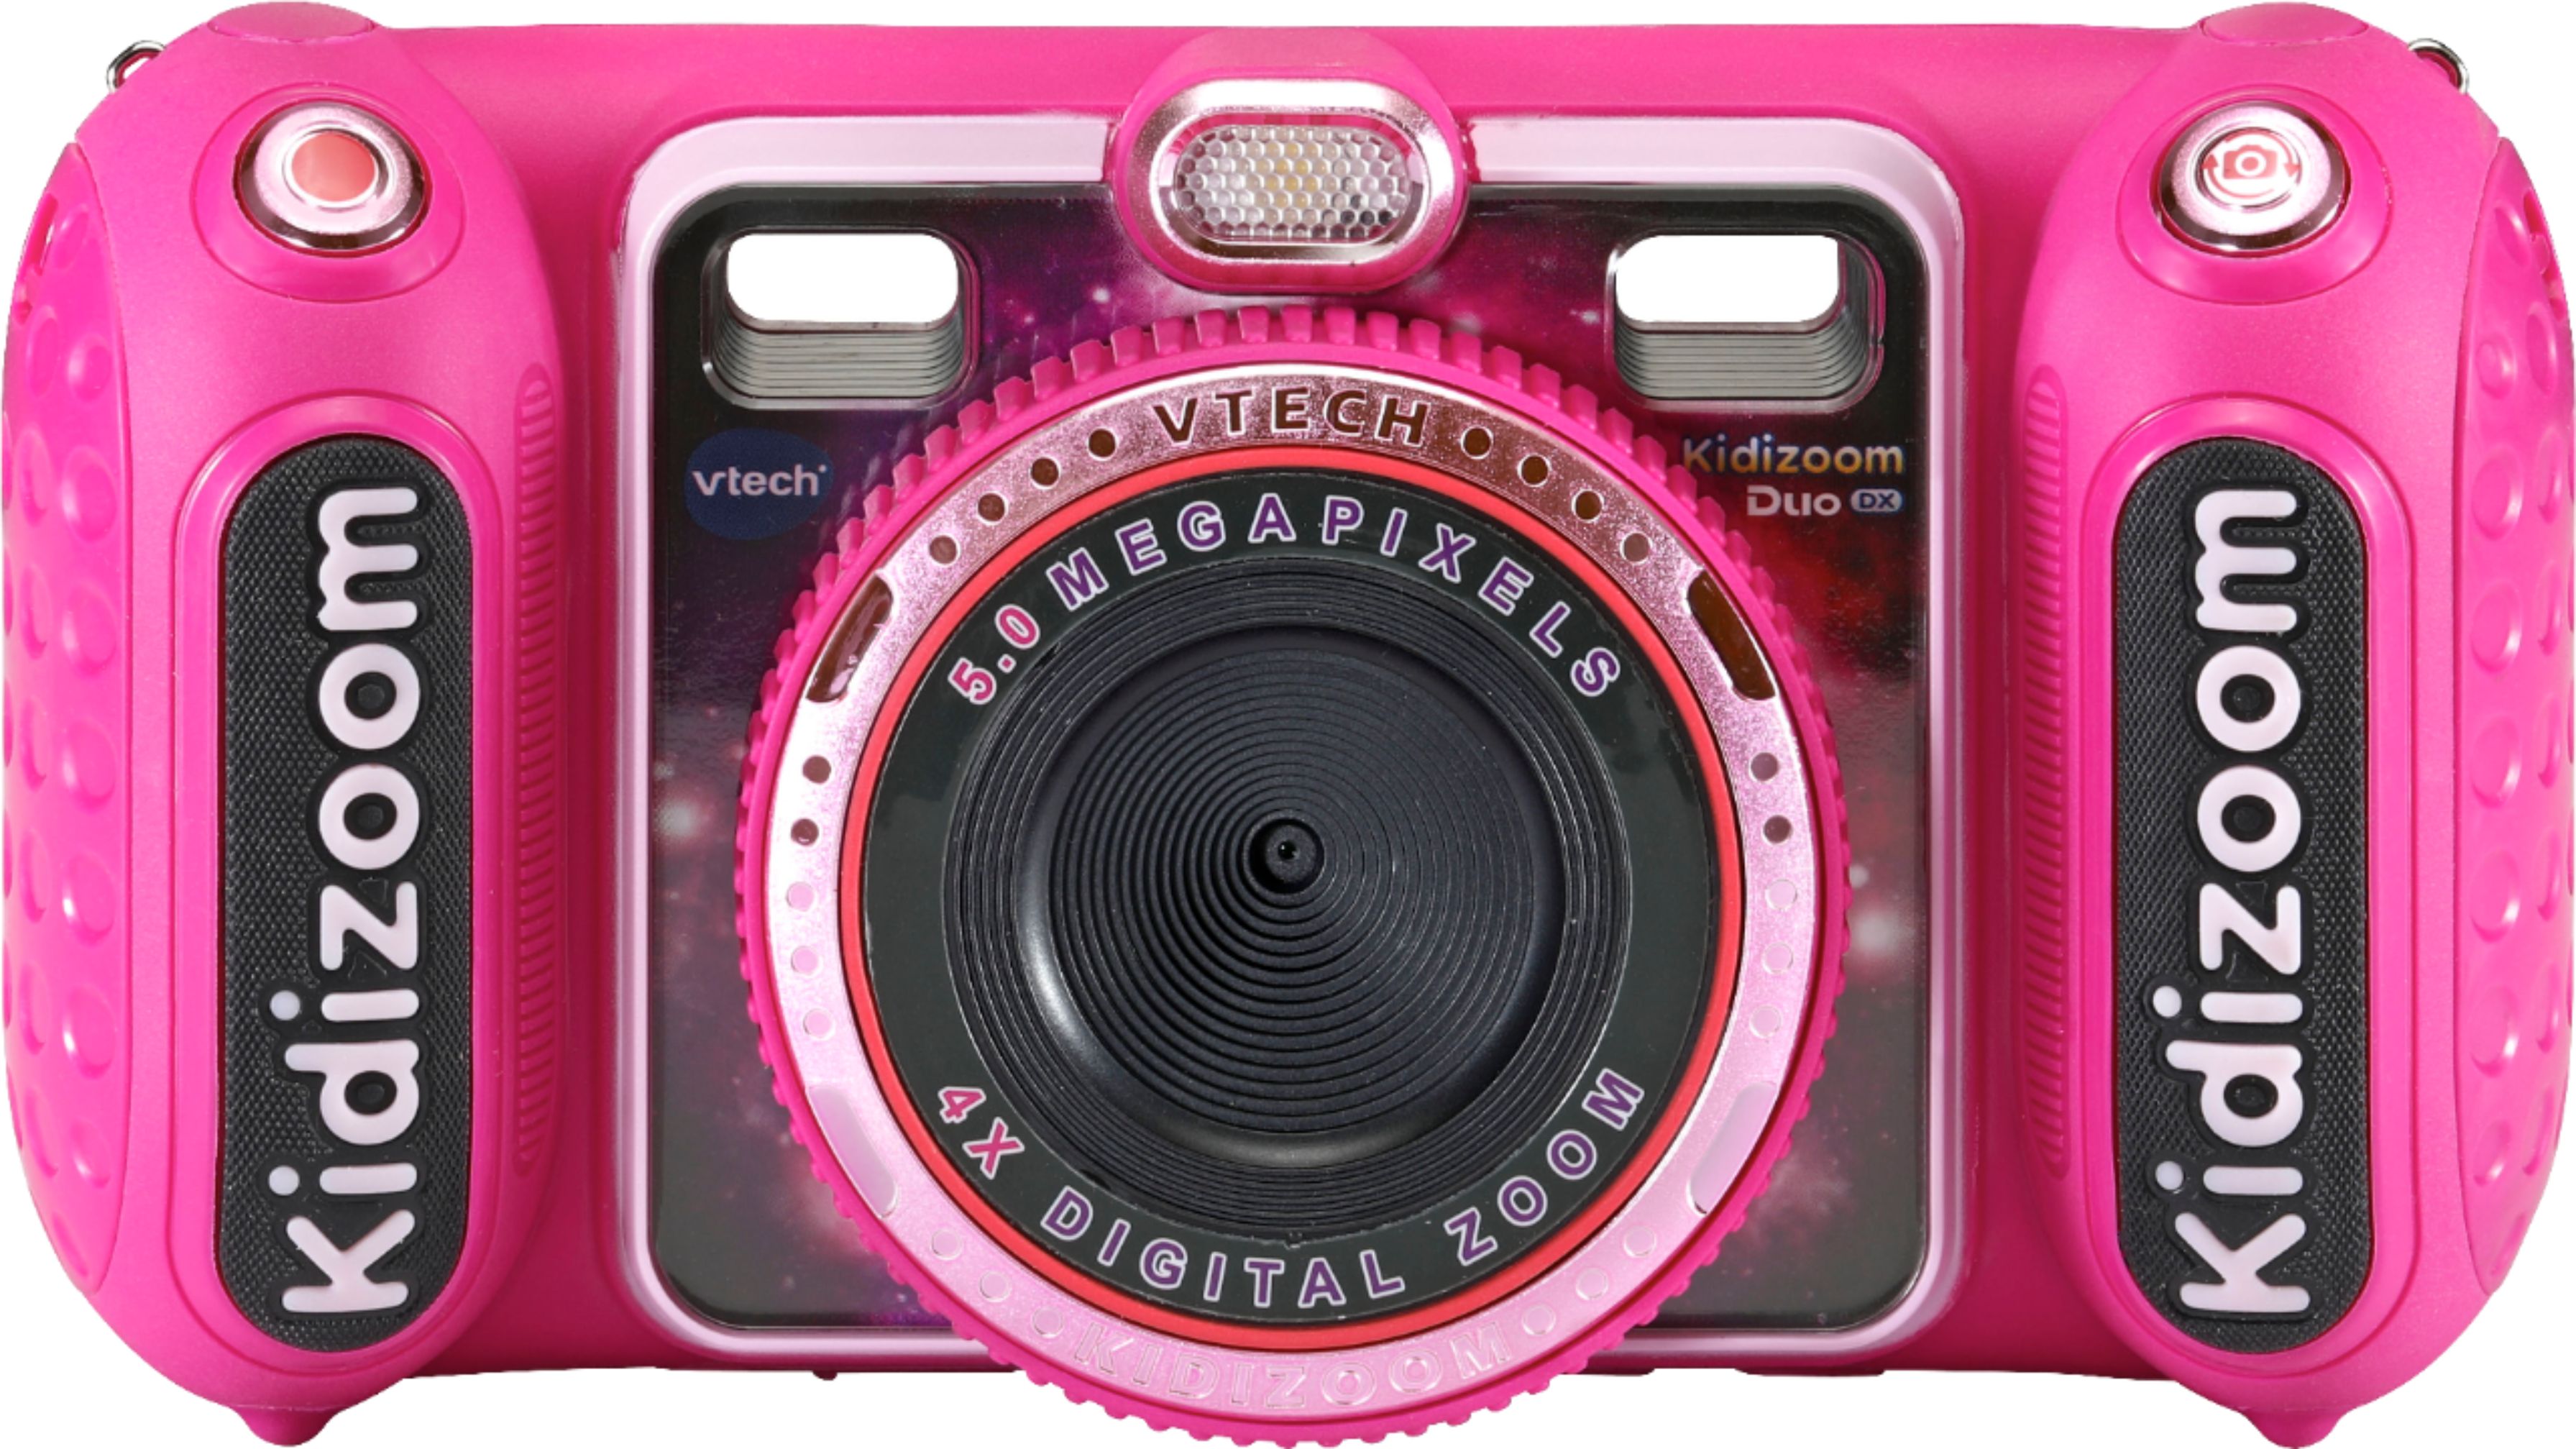 VTech Kidizoom DUO Camera - Pink - NEW